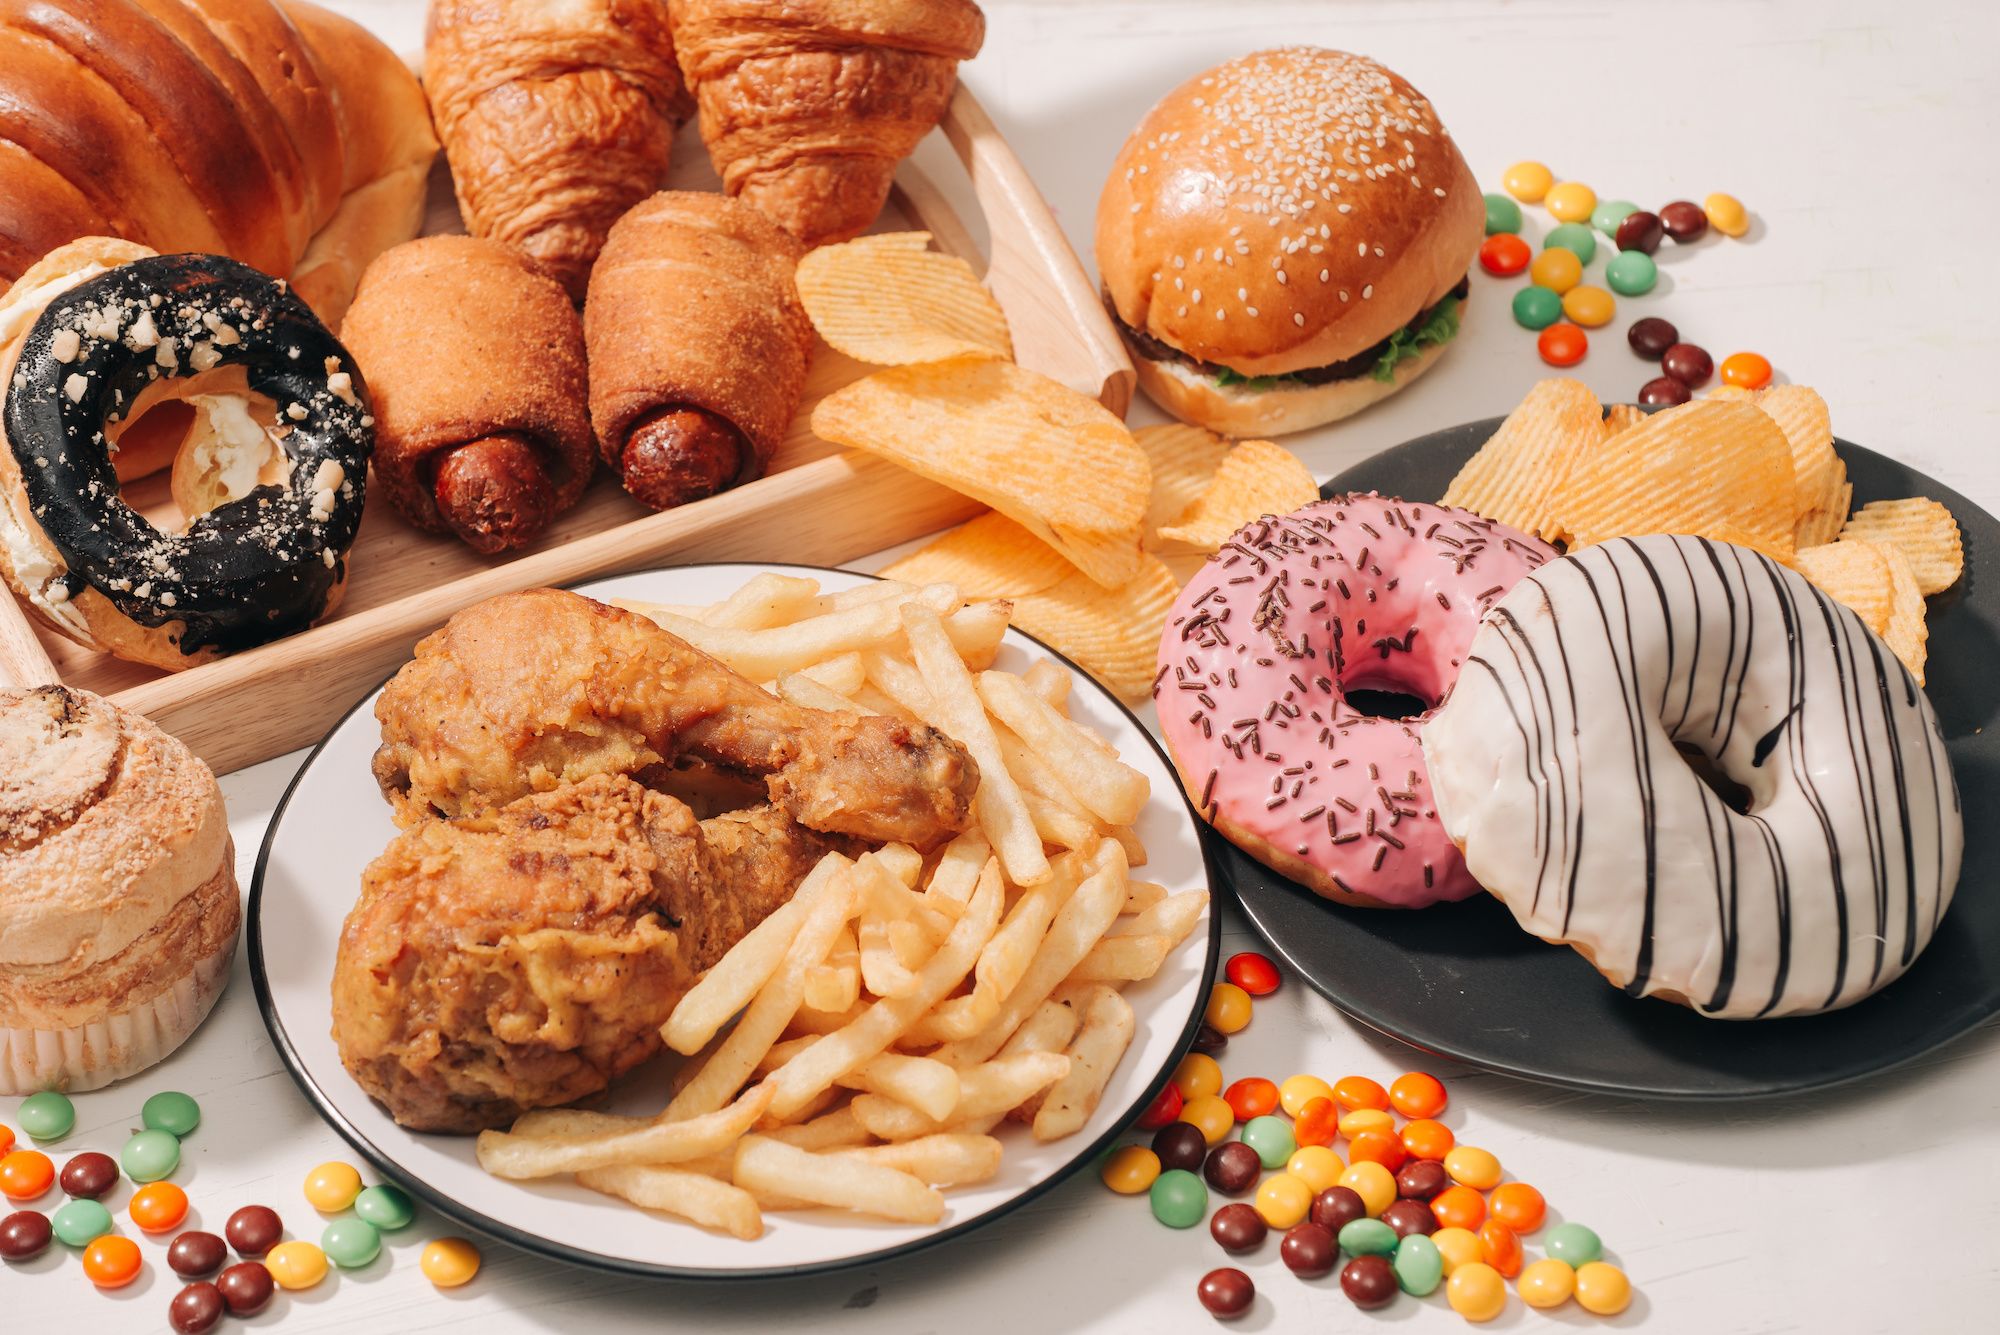 Ultra-processed foods linked to higher risk of disease, early death, studies reveal